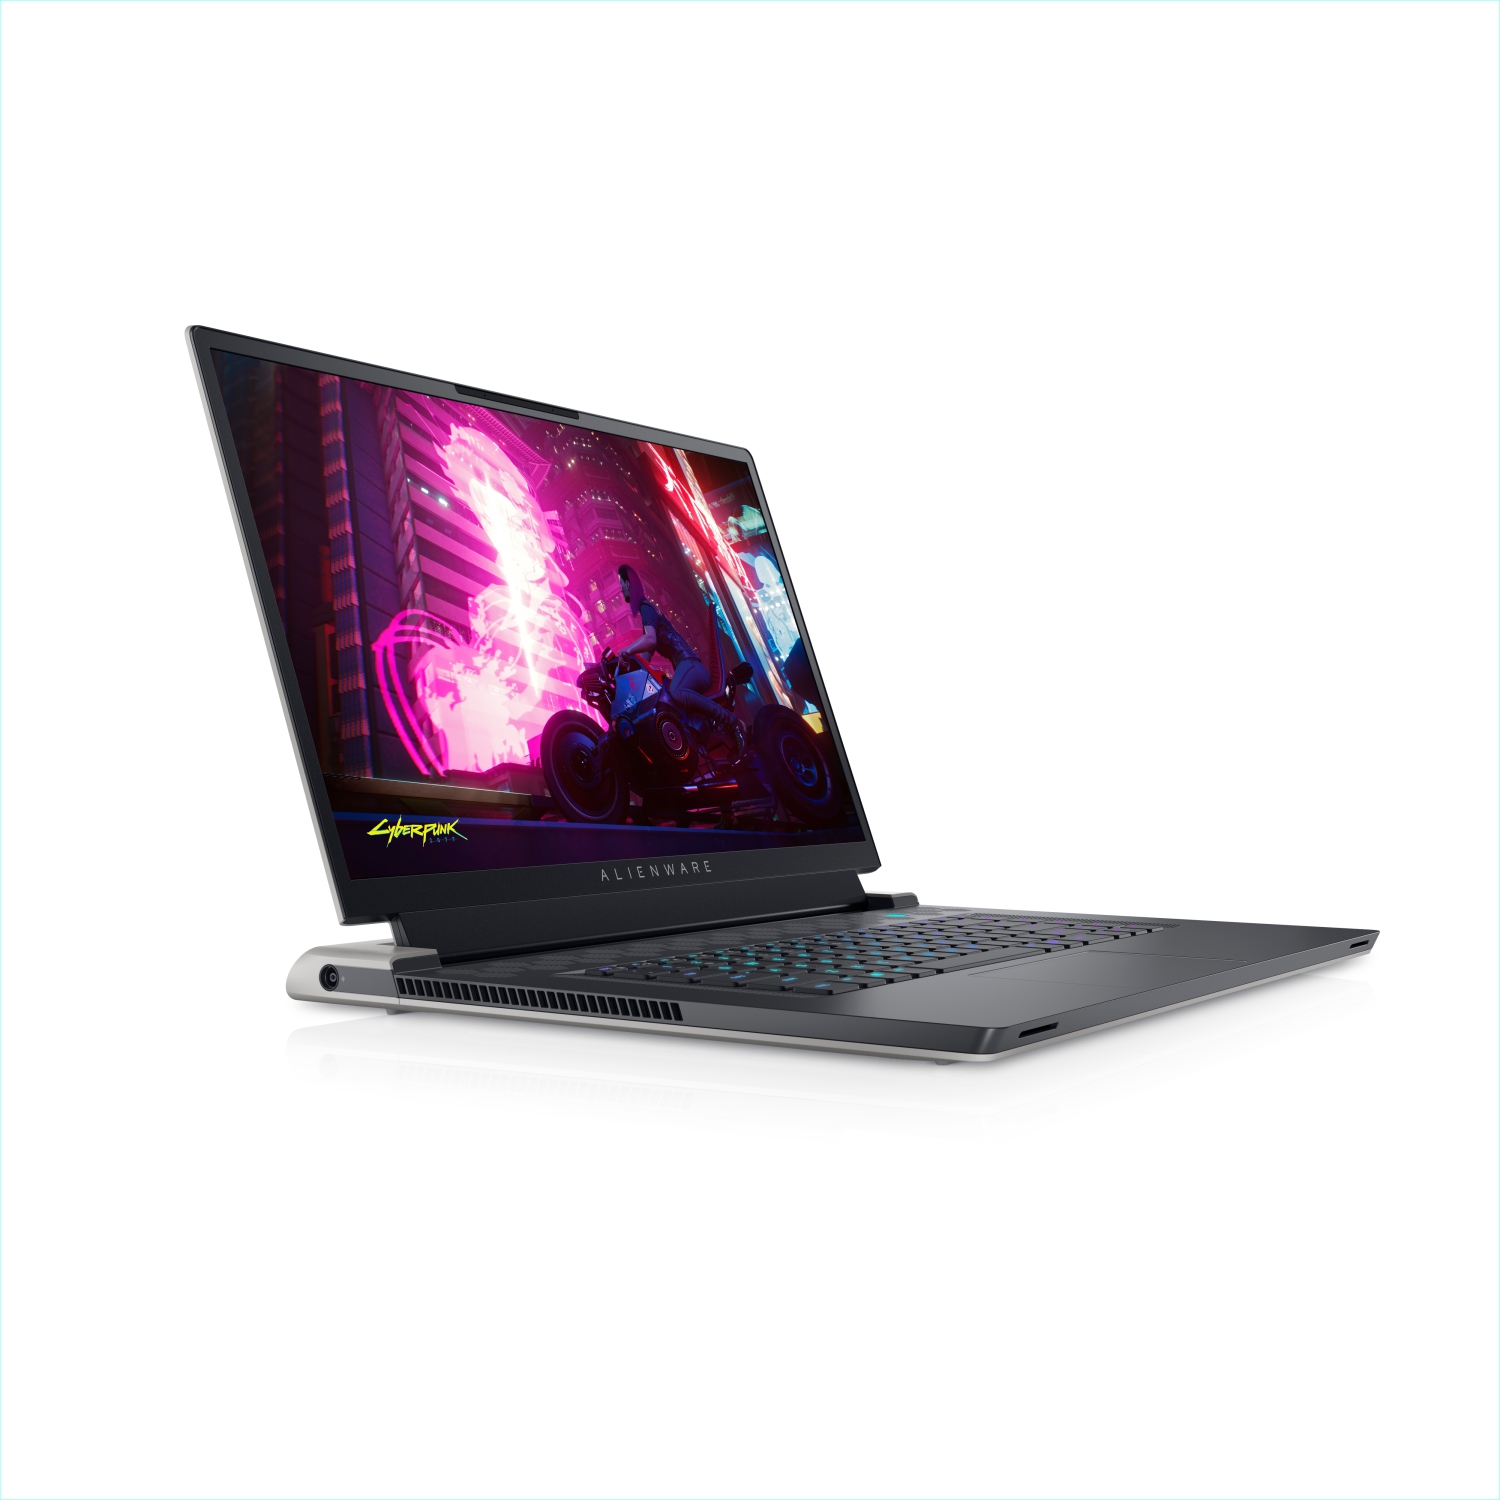 Refurbished (Excellent) – Dell Alienware X17 R1 Gaming Laptop (2021) | 17.3" 4K | Core i7 - 1TB SSD - 64GB RAM - RTX 3070 | 8 Cores @ 4.6 GHz - 11th Gen CPU - 8GB GDDR6